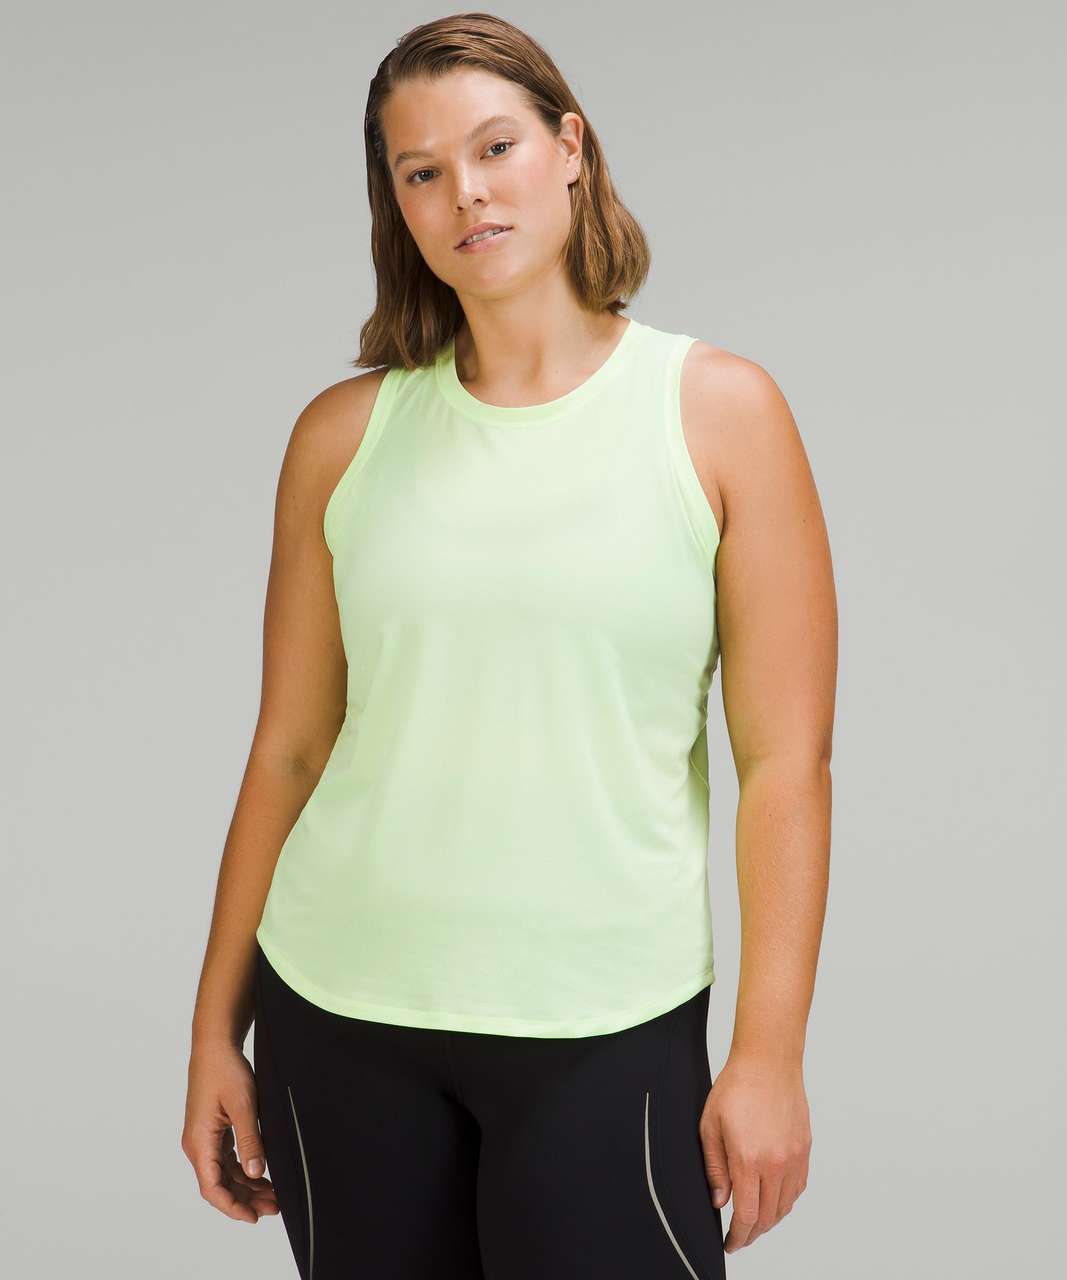 Lululemon High-Neck Running and Training Tank Top - Faded Zap